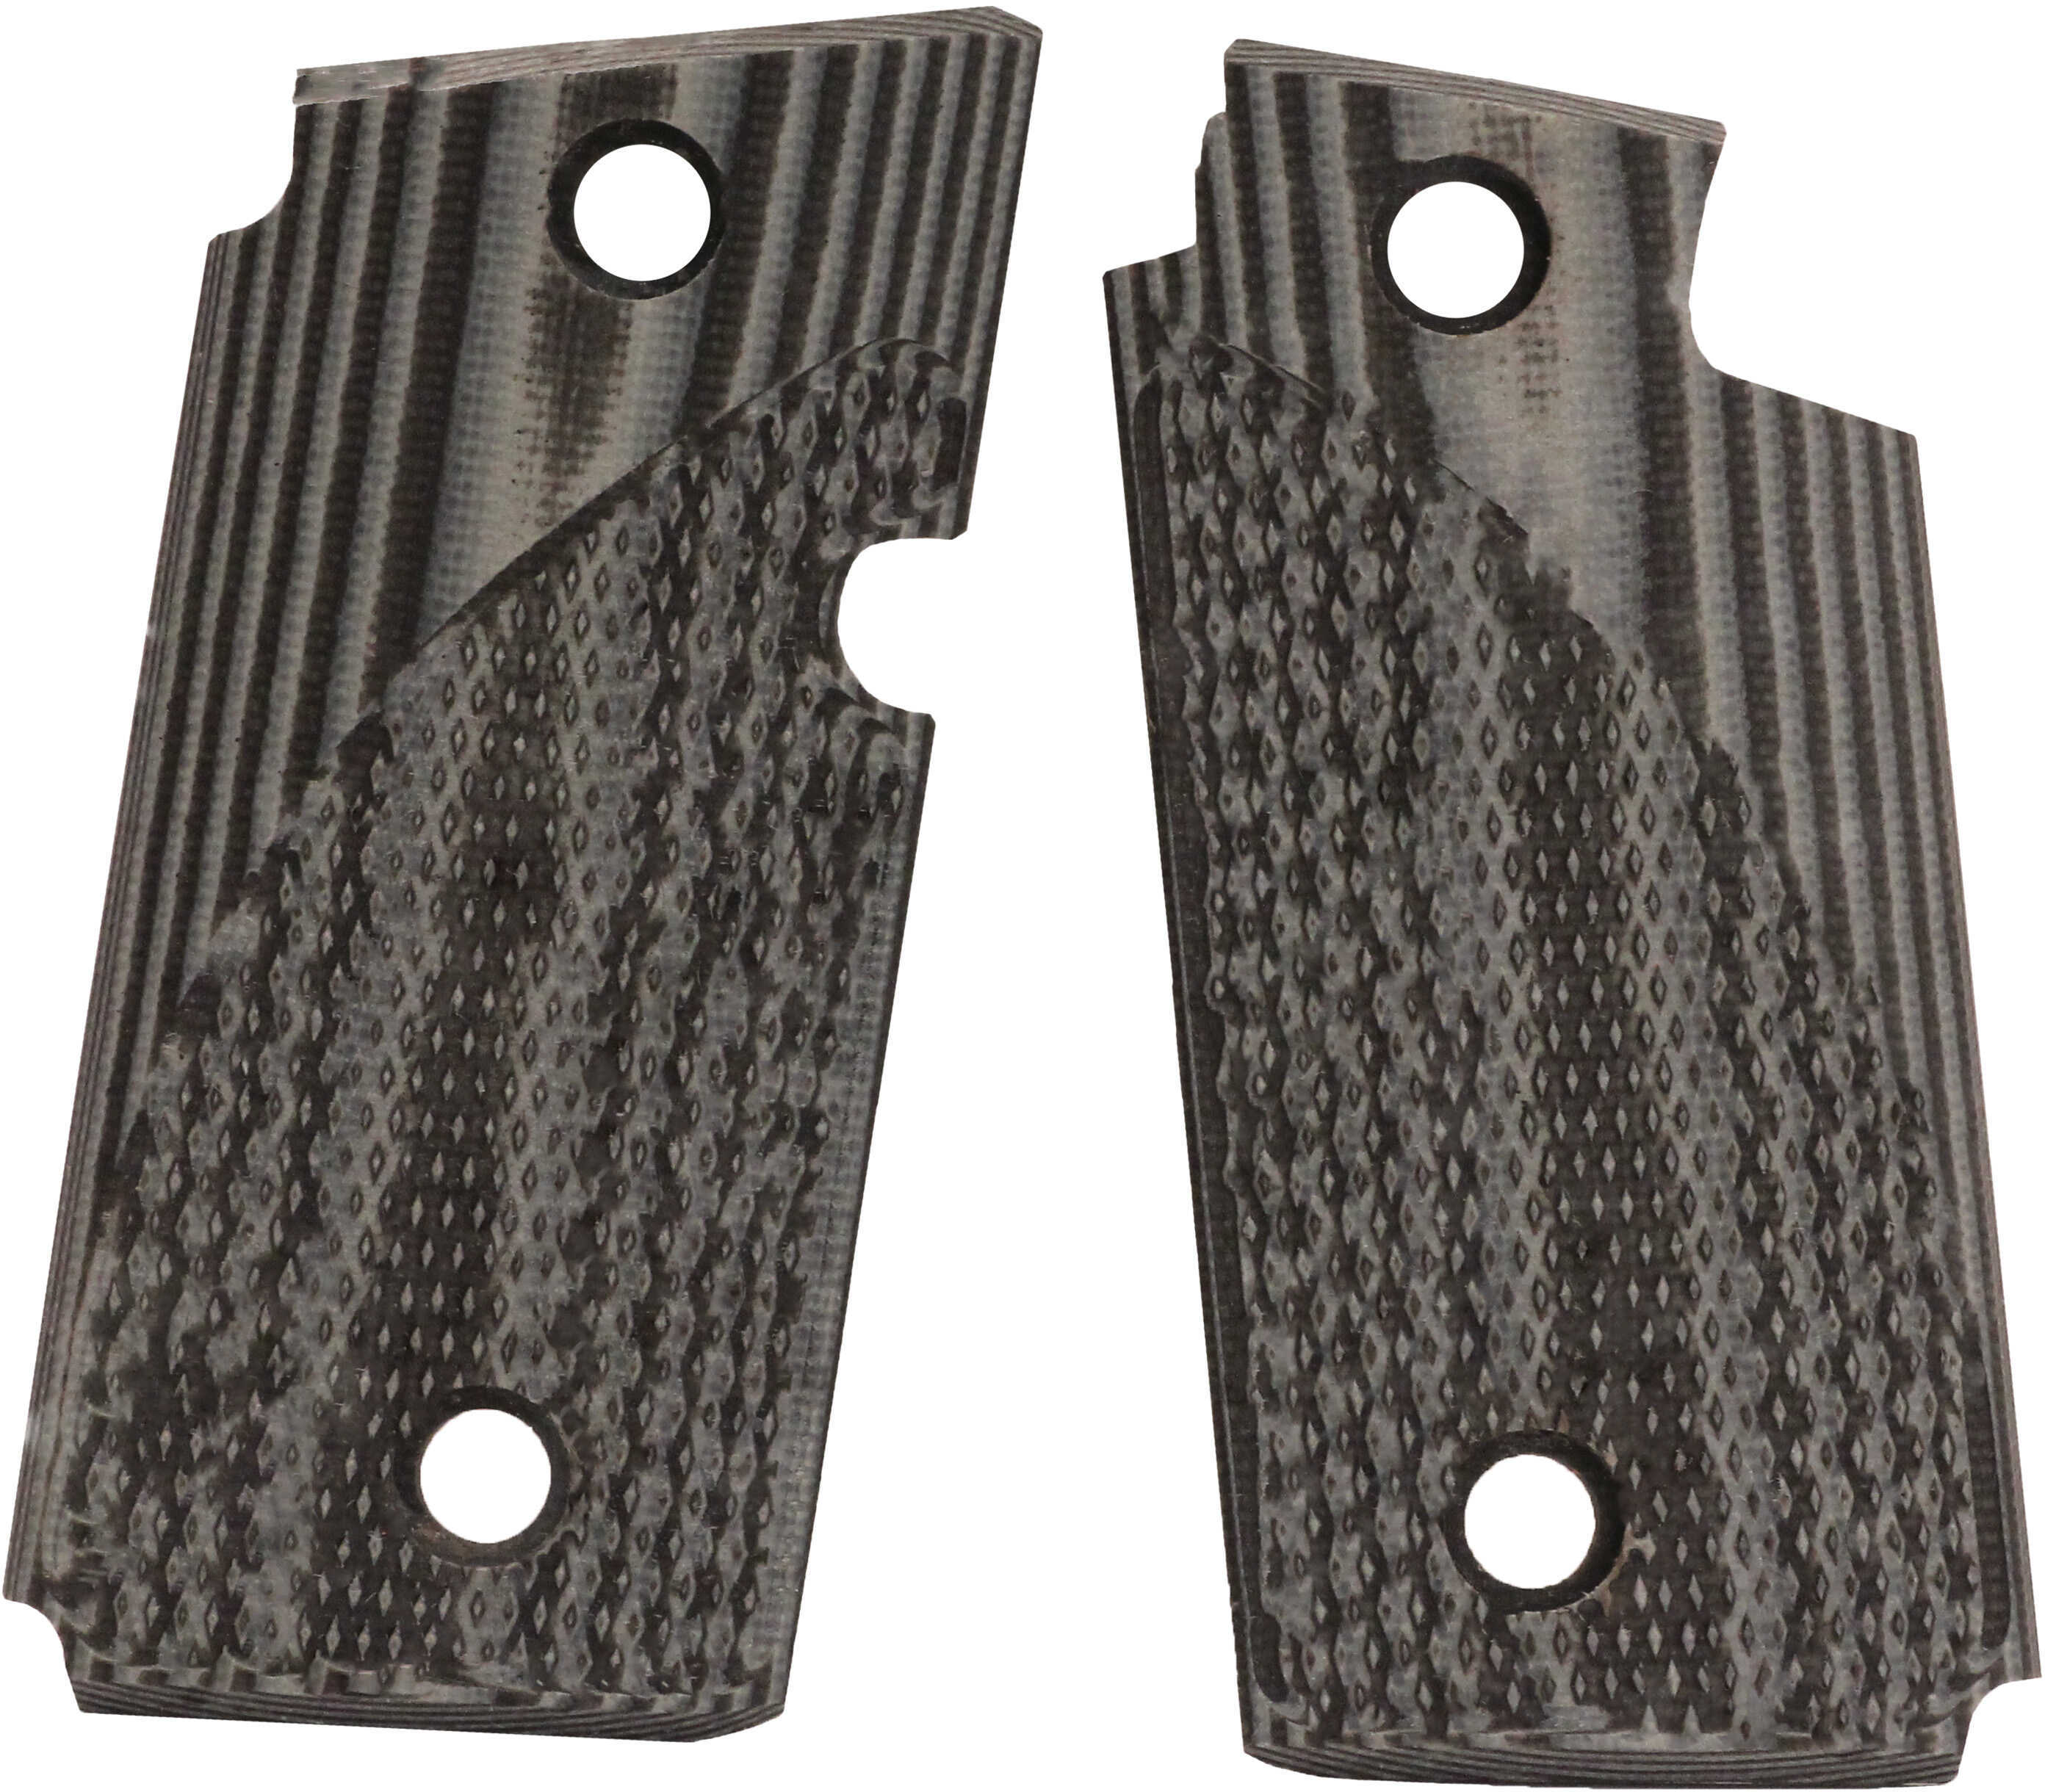 Pachmayr G-10 Tactical Pistol Grips Sig Sauer P238 Gray/Black Checkering Md: 61021